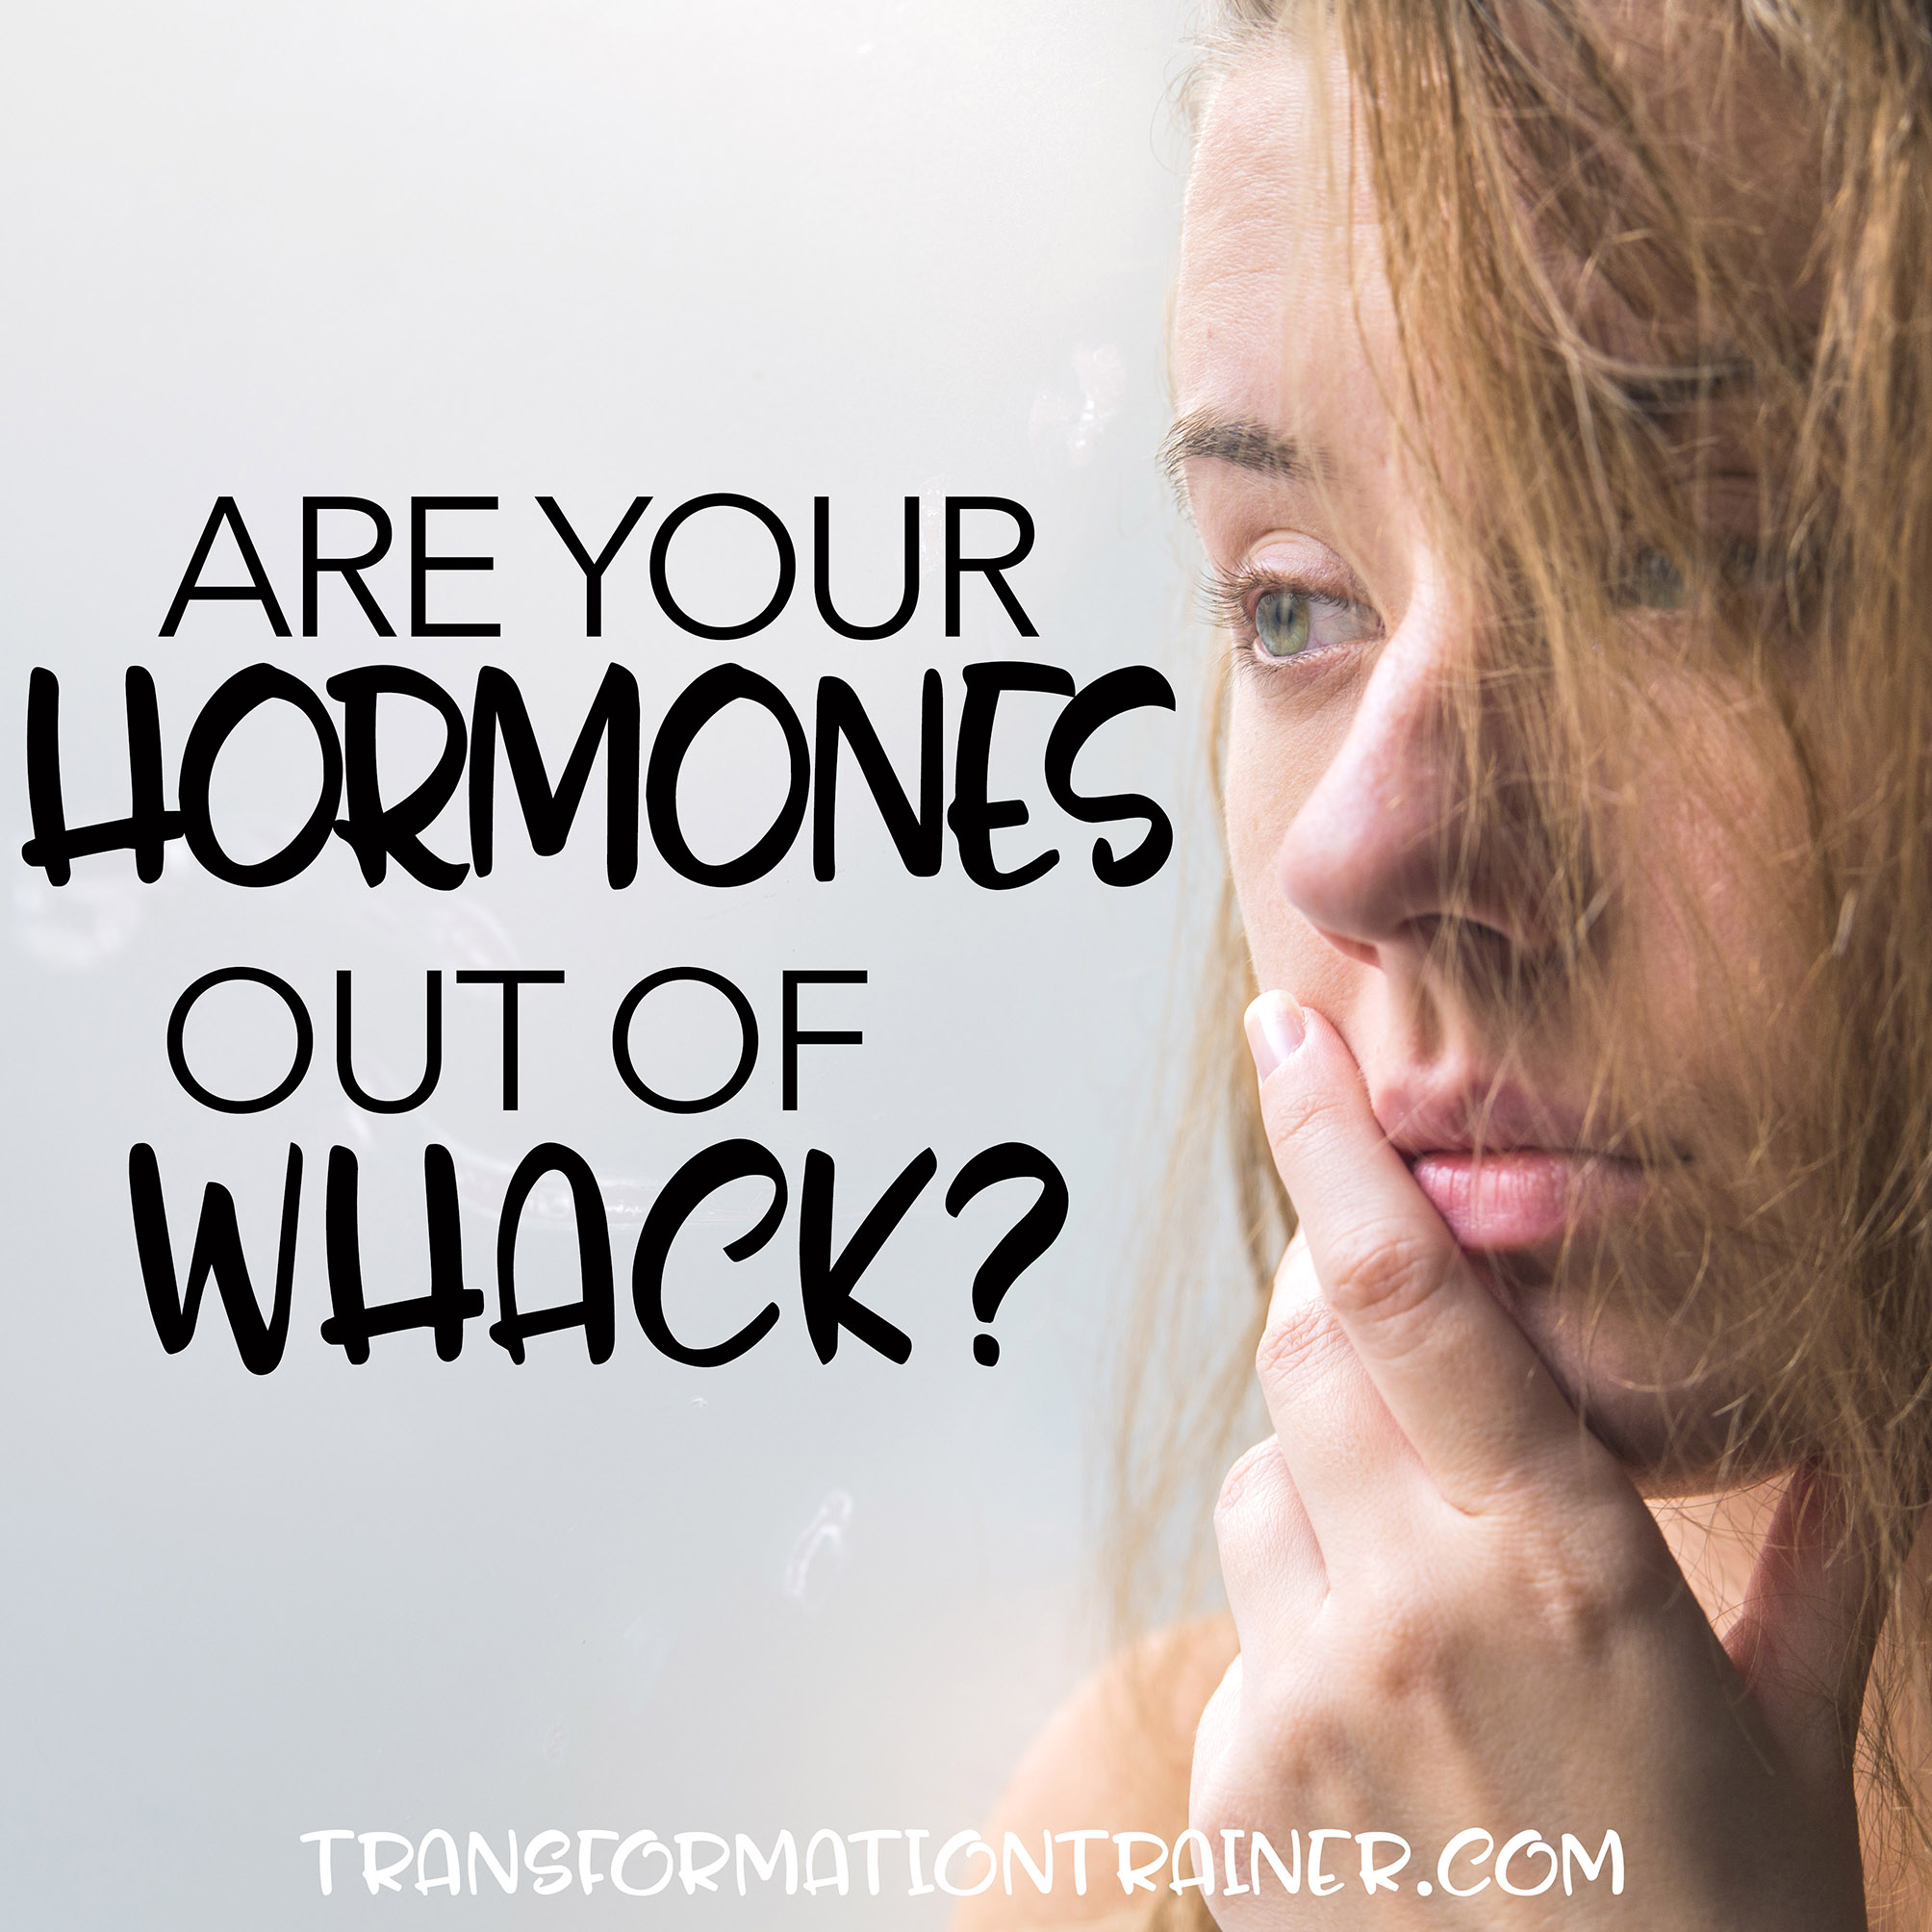 Are Your Hormones Out Of Whack?